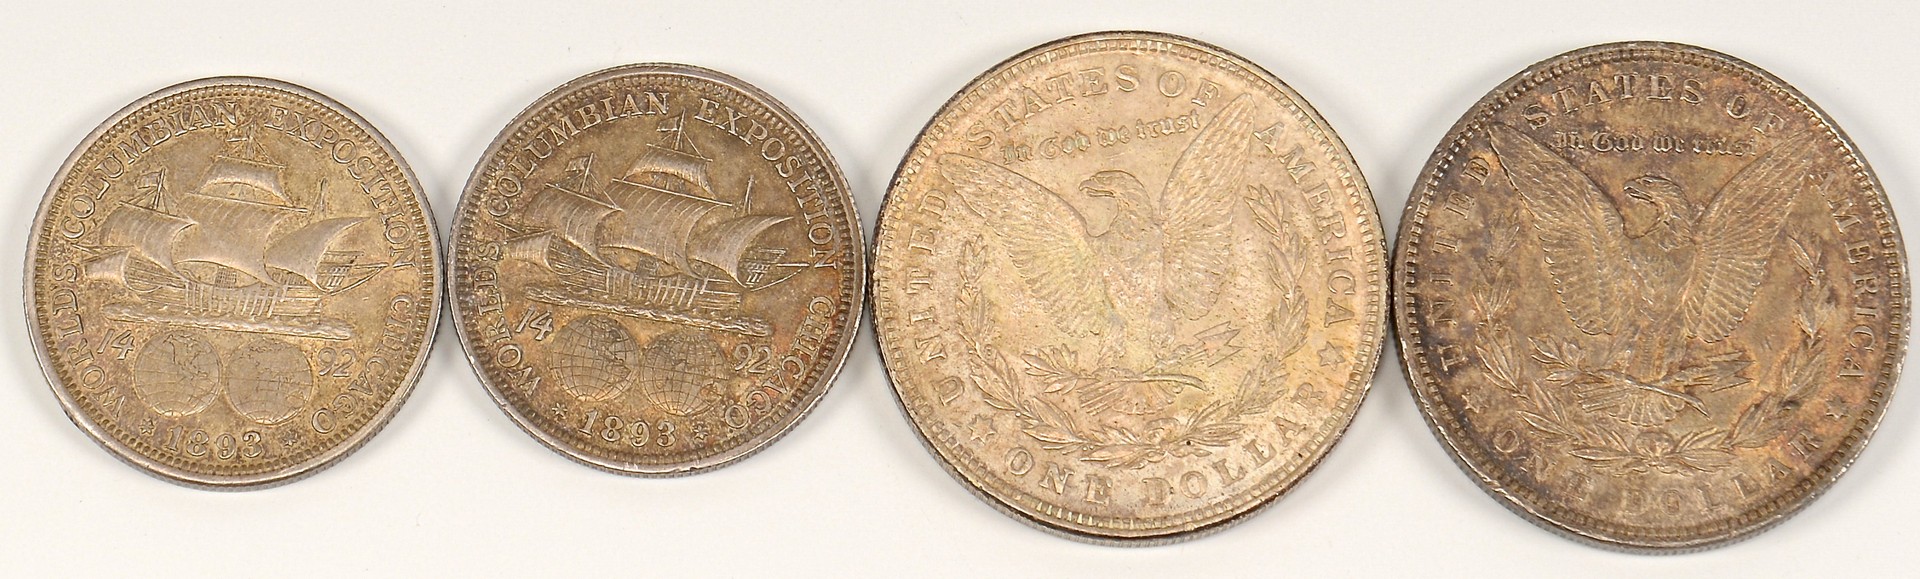 Lot 900: Group of 13 Commemorative Coins